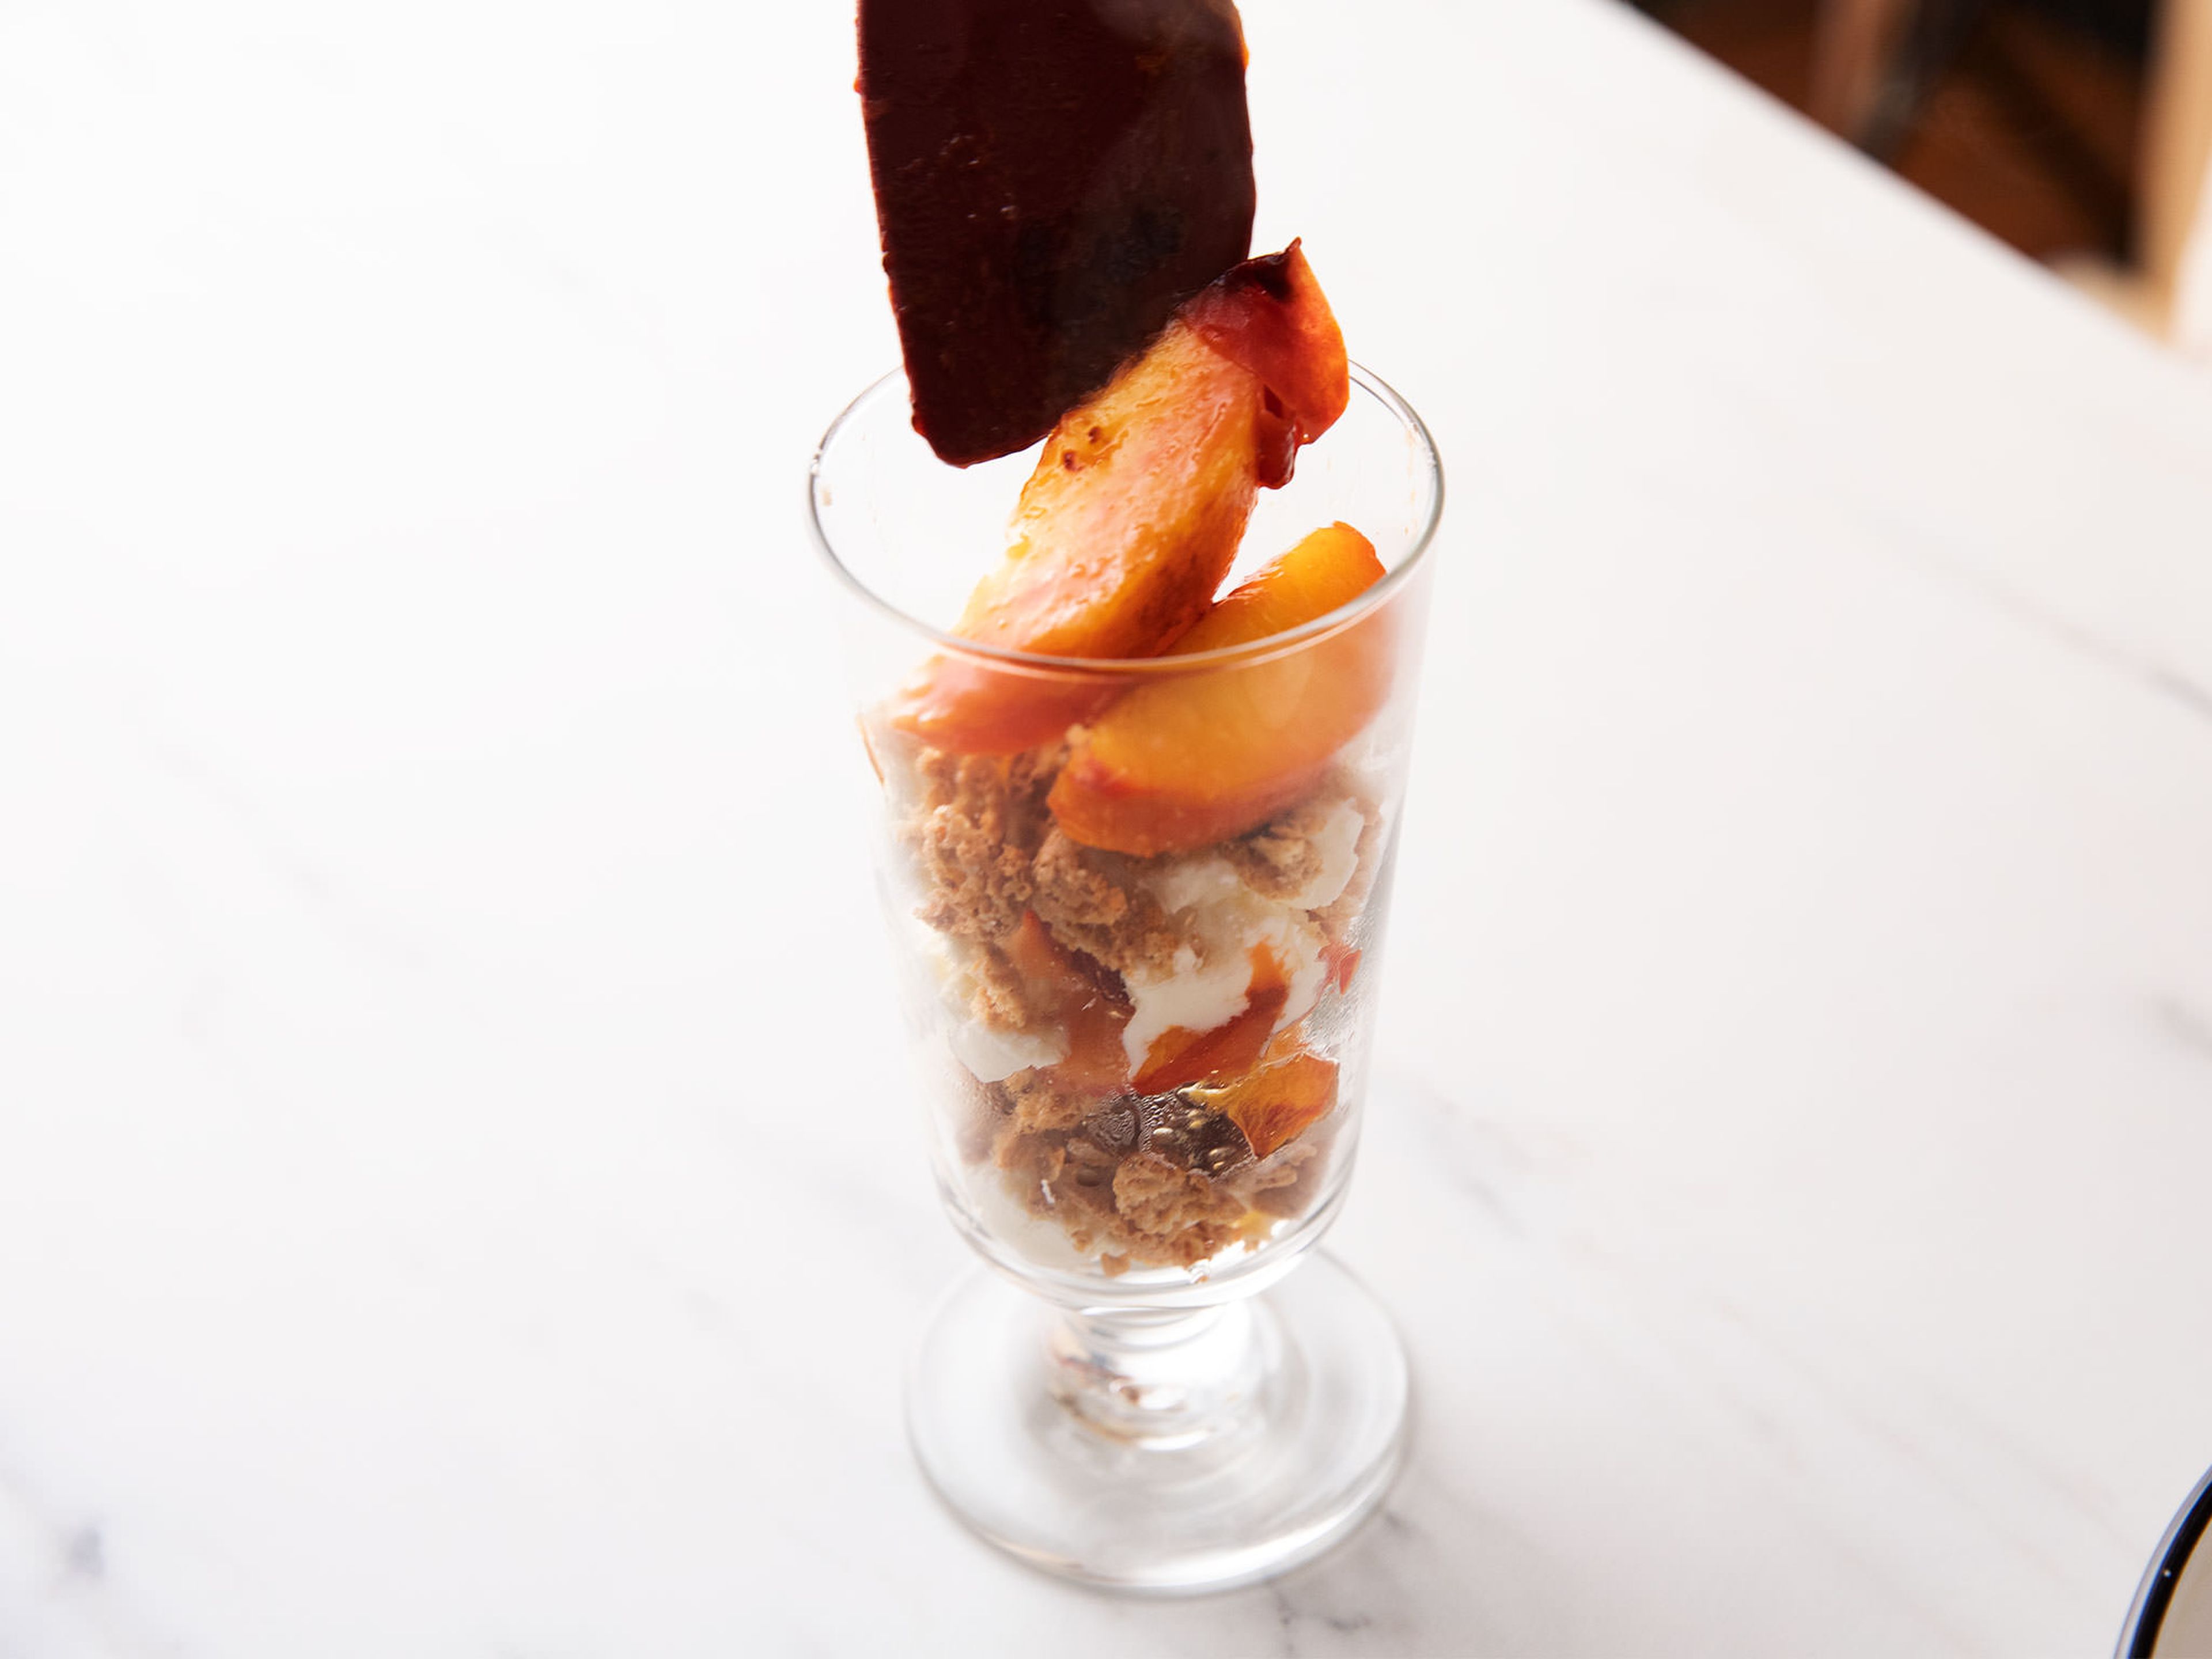 Put a few nectarine slices in the bottom of a trifle glass. Add a layer of mascarpone. Sprinkle with some amaretti pieces. Layer until the top of the glass is reached, then garnish with remaining nectarine slices and a finishing sprinkle of amaretti. Enjoy!